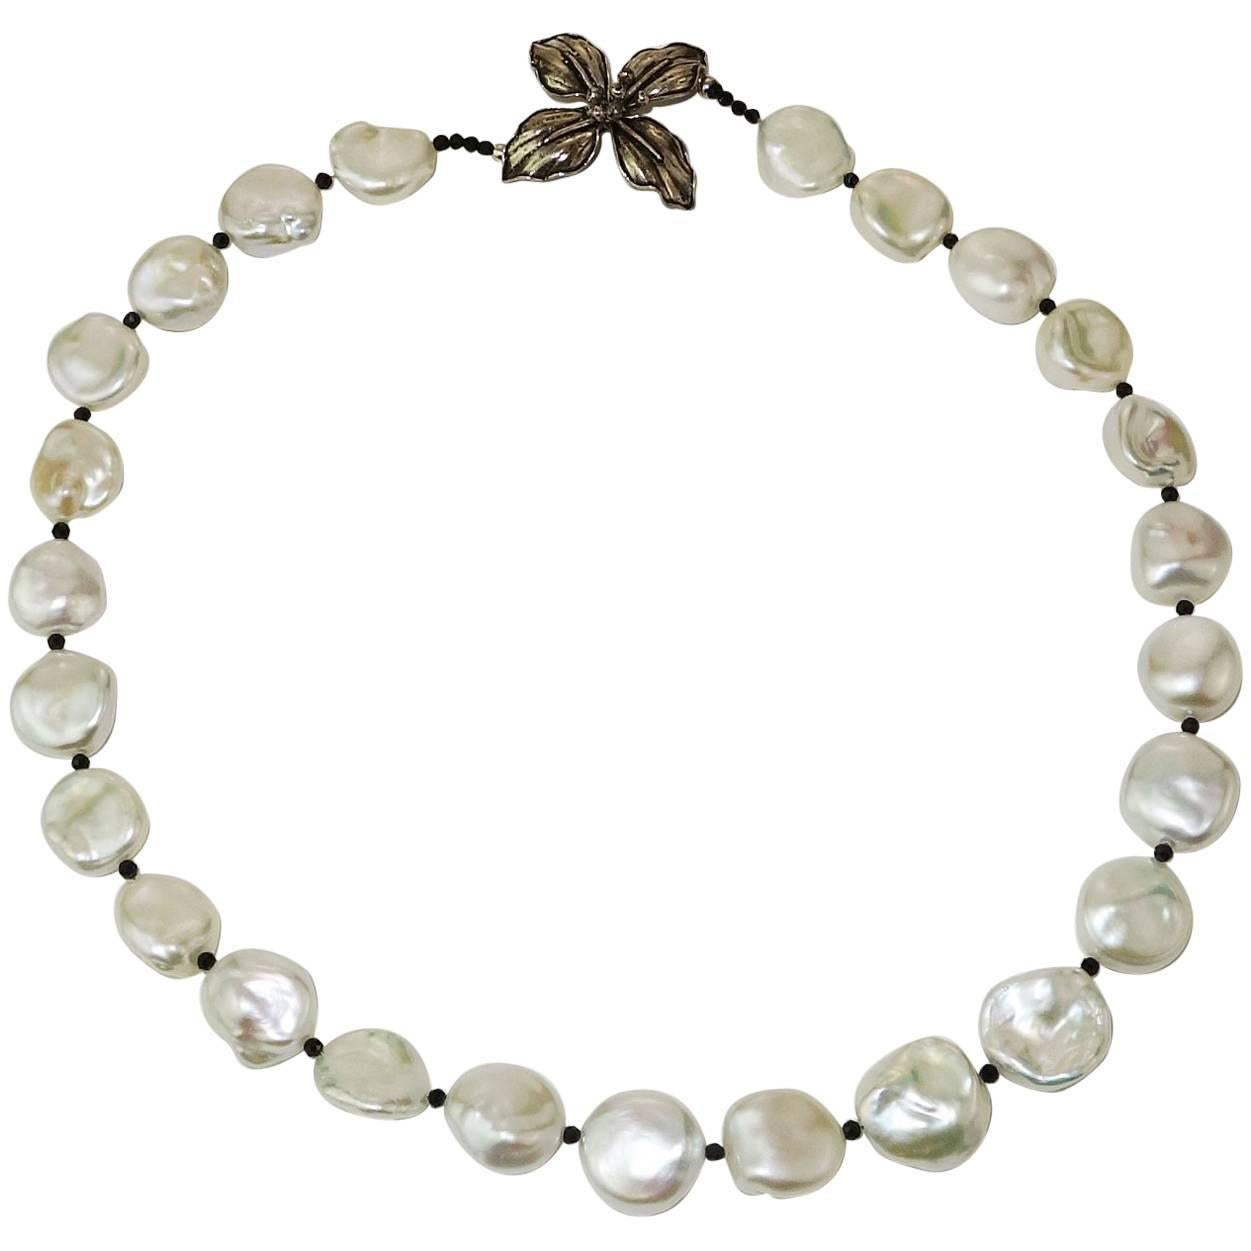 White Iridescent Freshwater Pearls with Black Spinel Accents Necklace